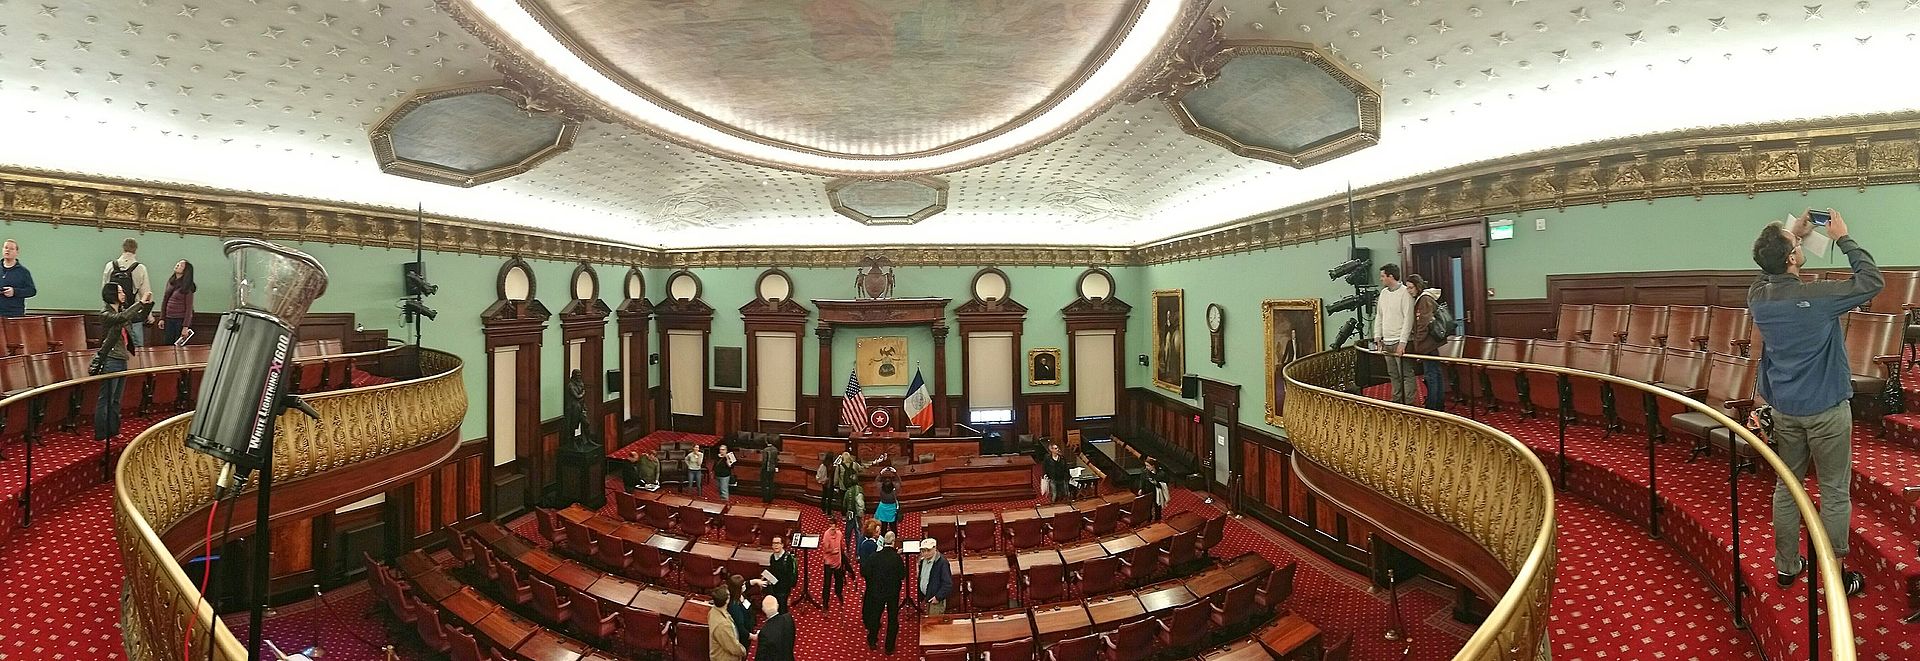 New York City City Hall, a panorama of The City Council Chamber, viewed from the Observation mezzanine